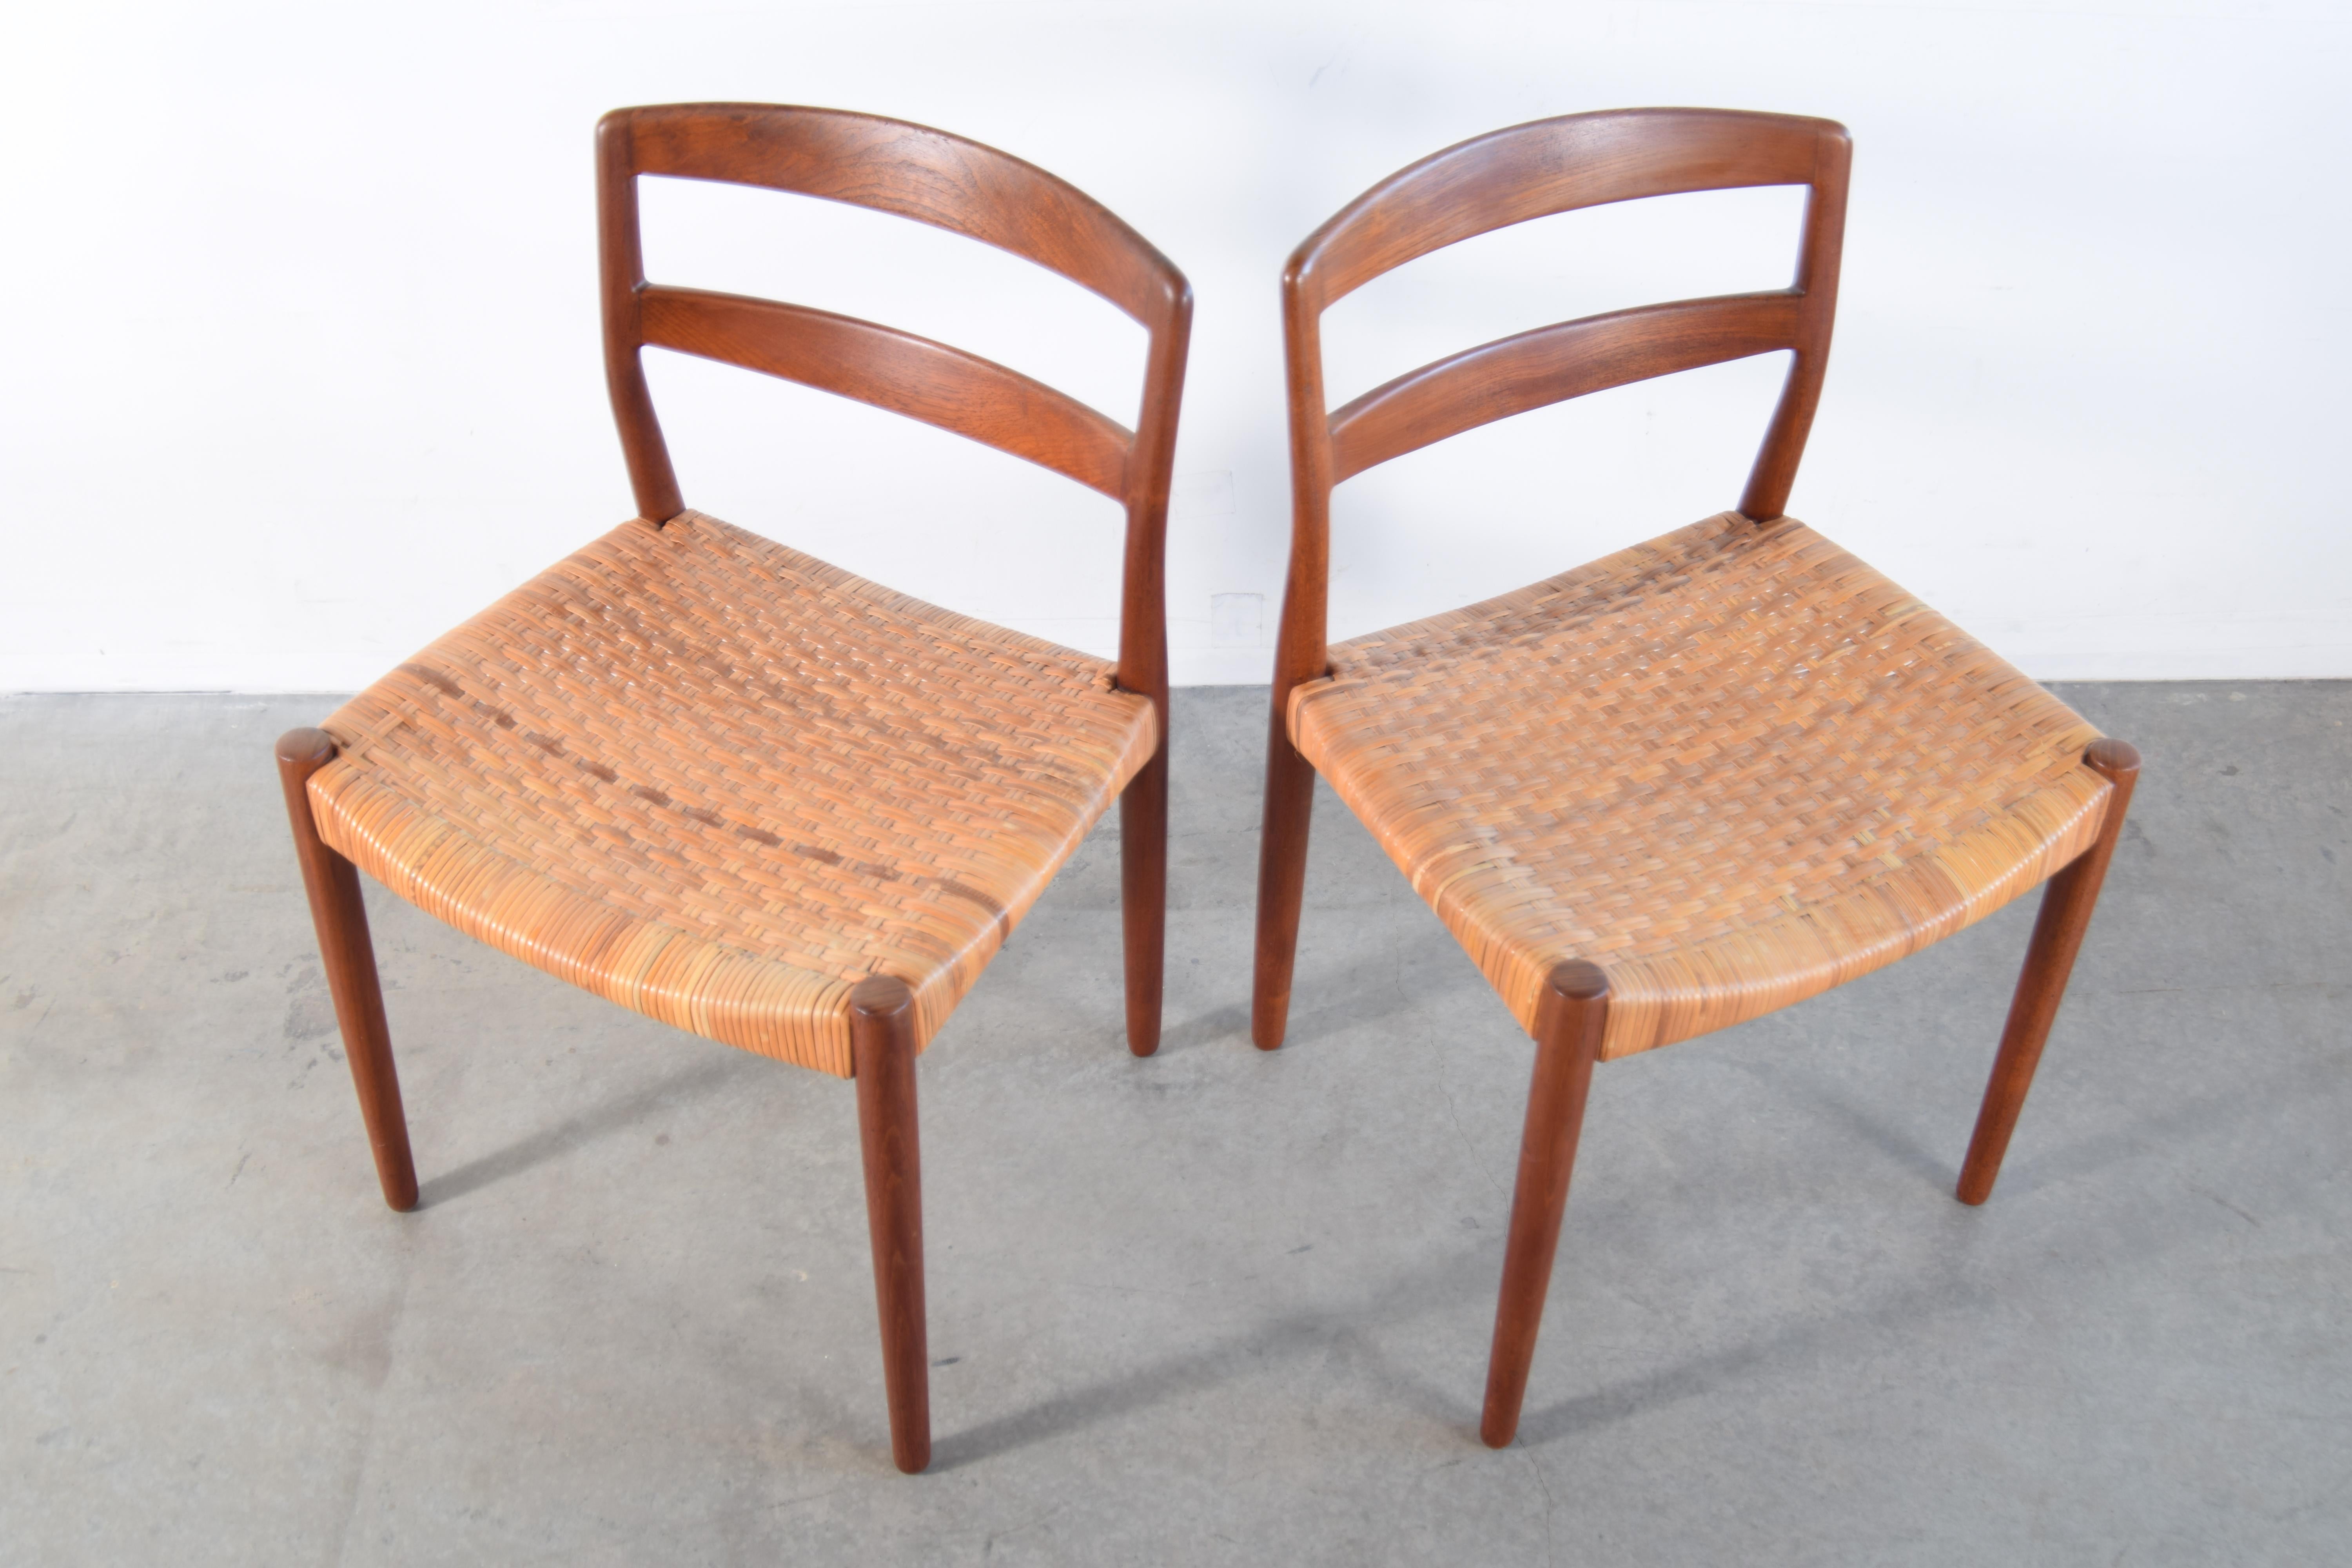 20th Century Pair of Ejner Larsen and Aksel Bender Madsen Teak and Cane Chairs For Sale